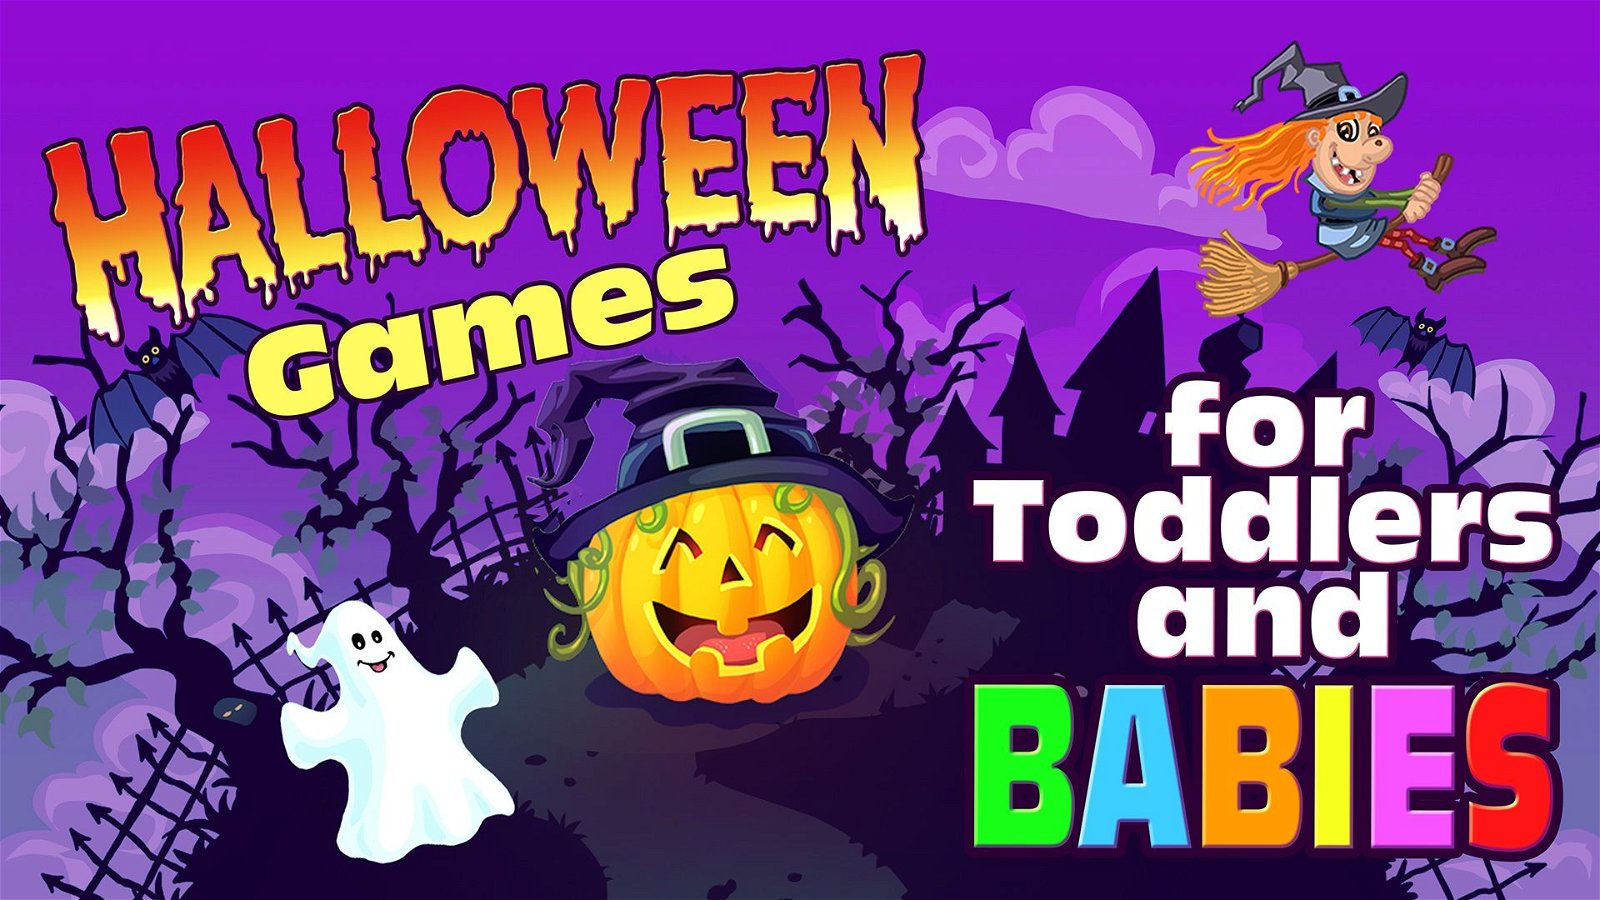 Image of Halloween Games for Toddlers and Babies